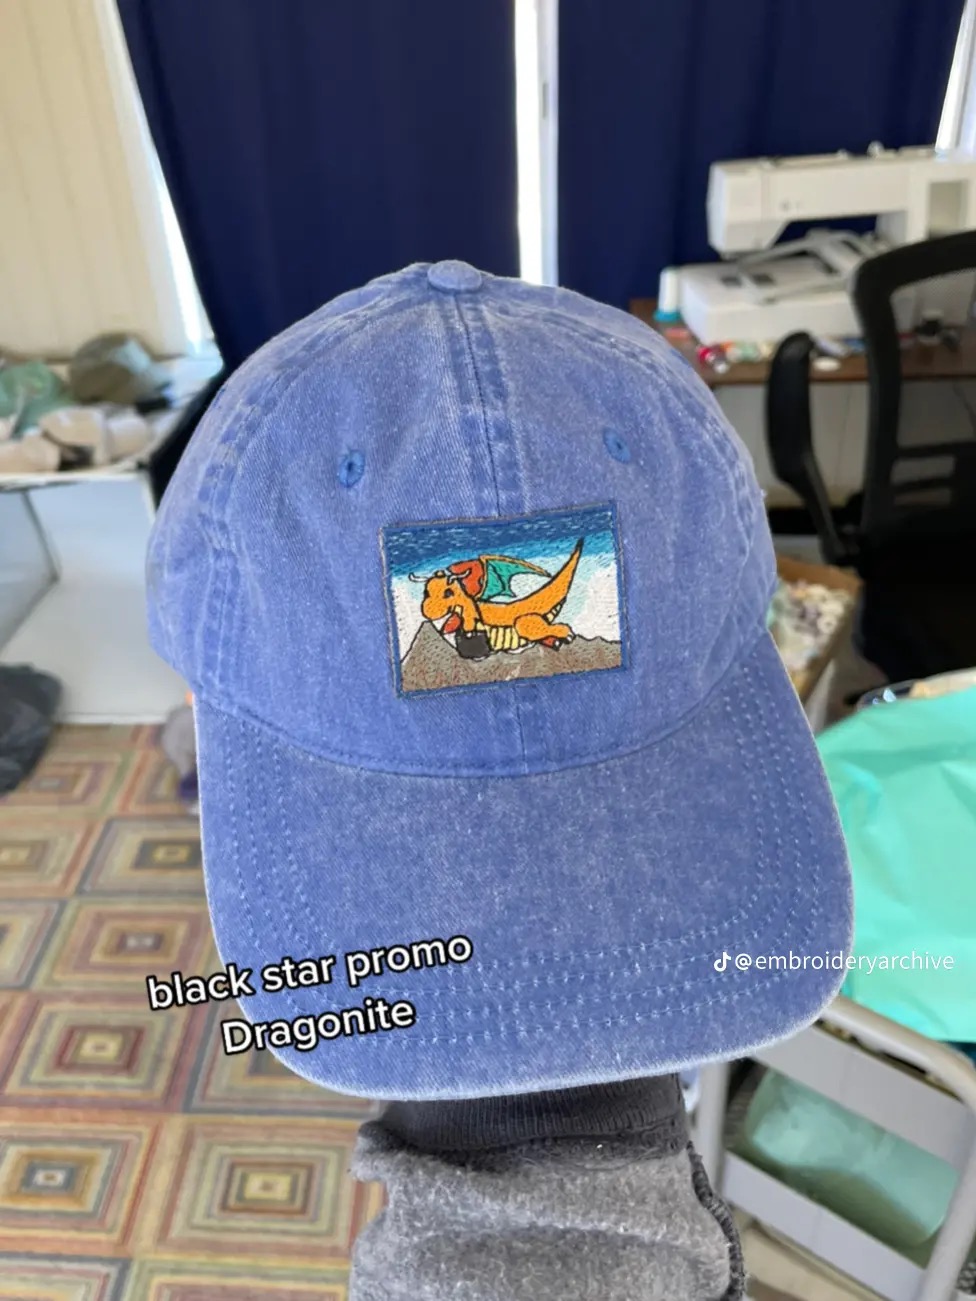 I saw some very cool hats embroidered with card art - General - Elite Fourum